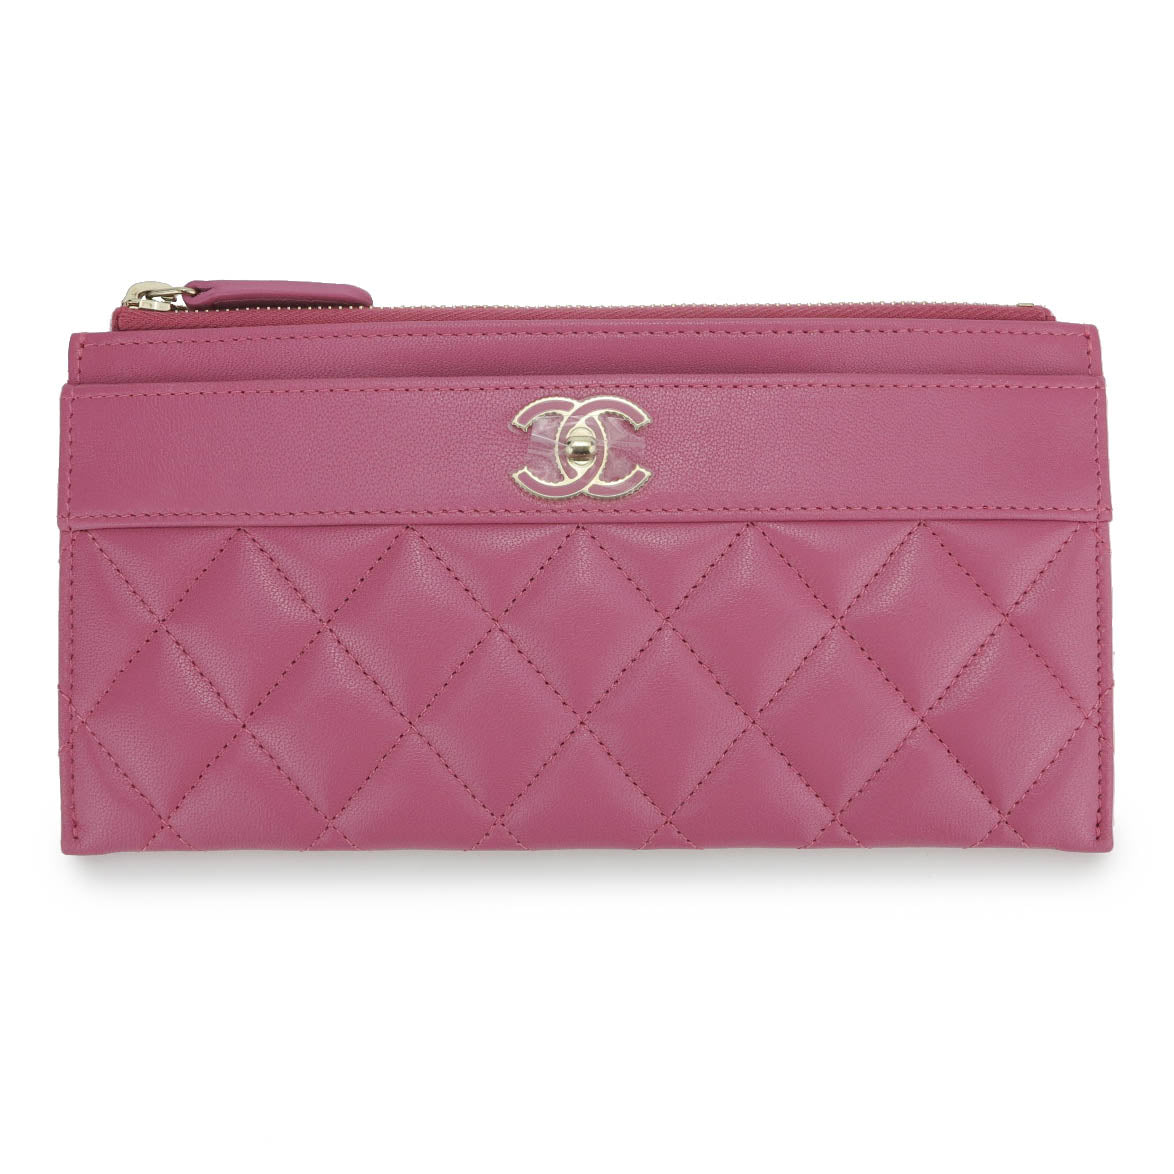 Chanel Medium Zip Long Wallet Leather Pink A80481 W15.5xH9xD2cm Free  Shipping